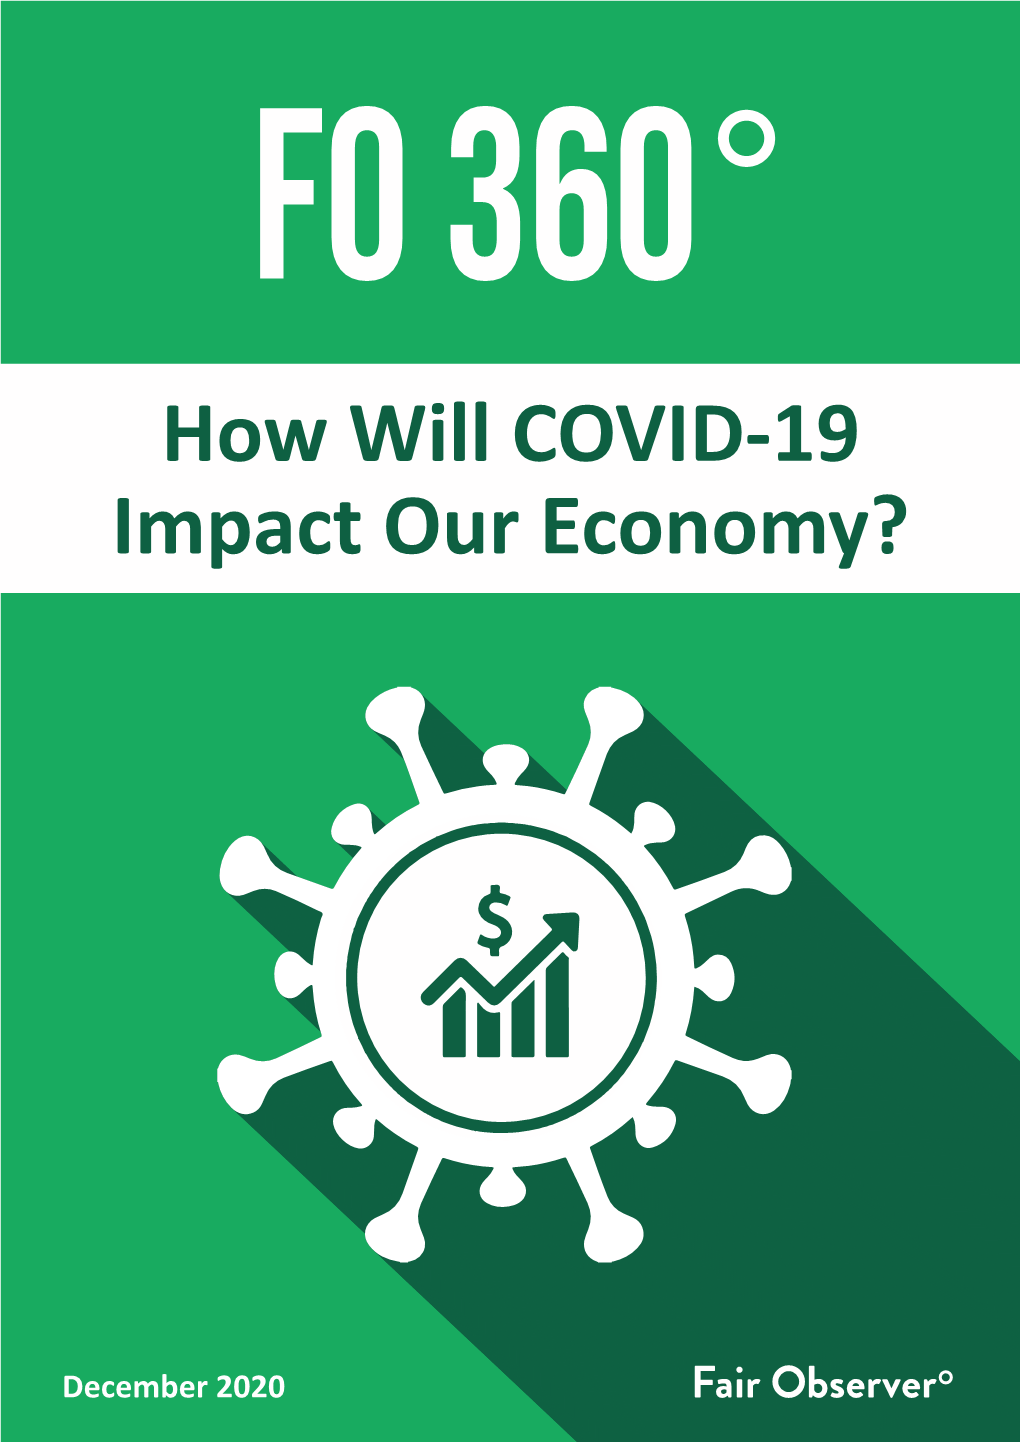 How Will COVID-19 Impact Our Economy?